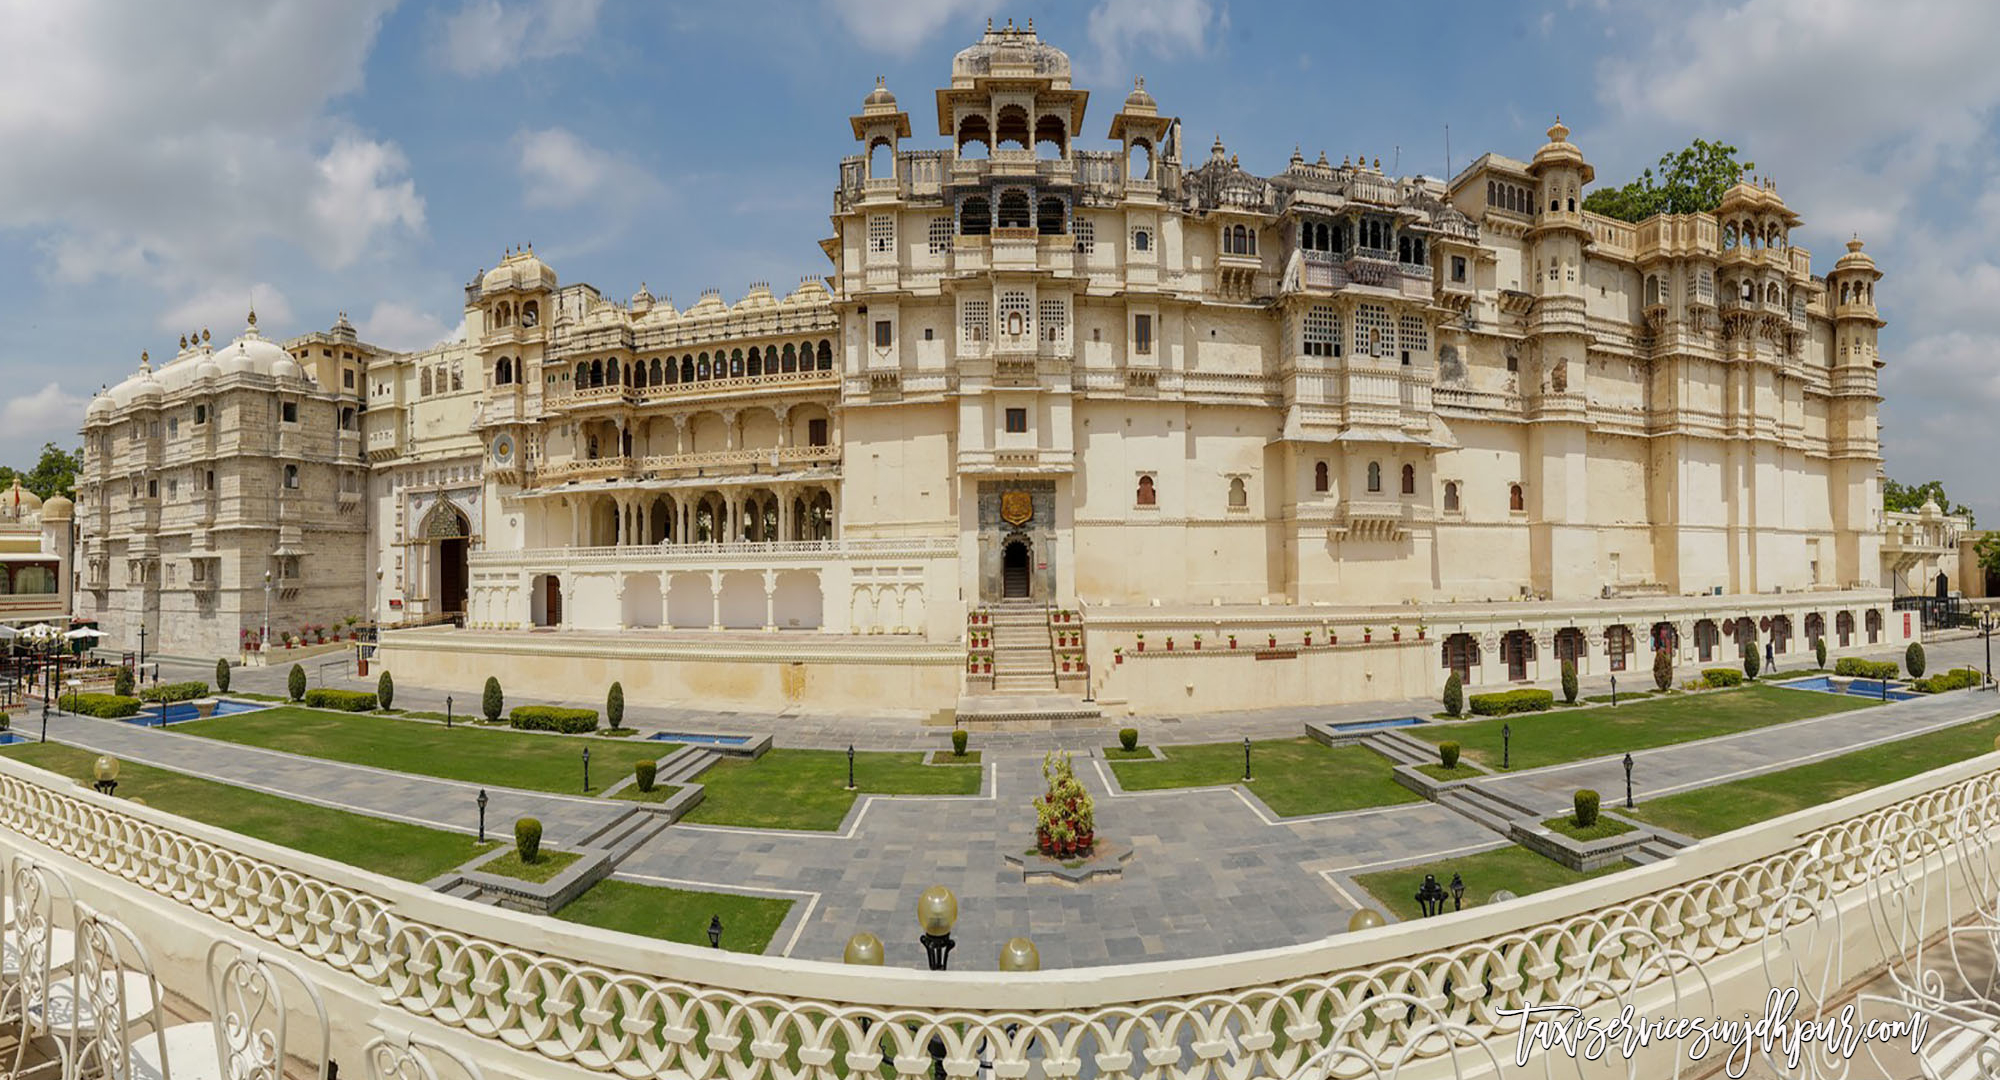 Best Taxi Service In Udaipur Rajasthan - Jodhpur Cabs